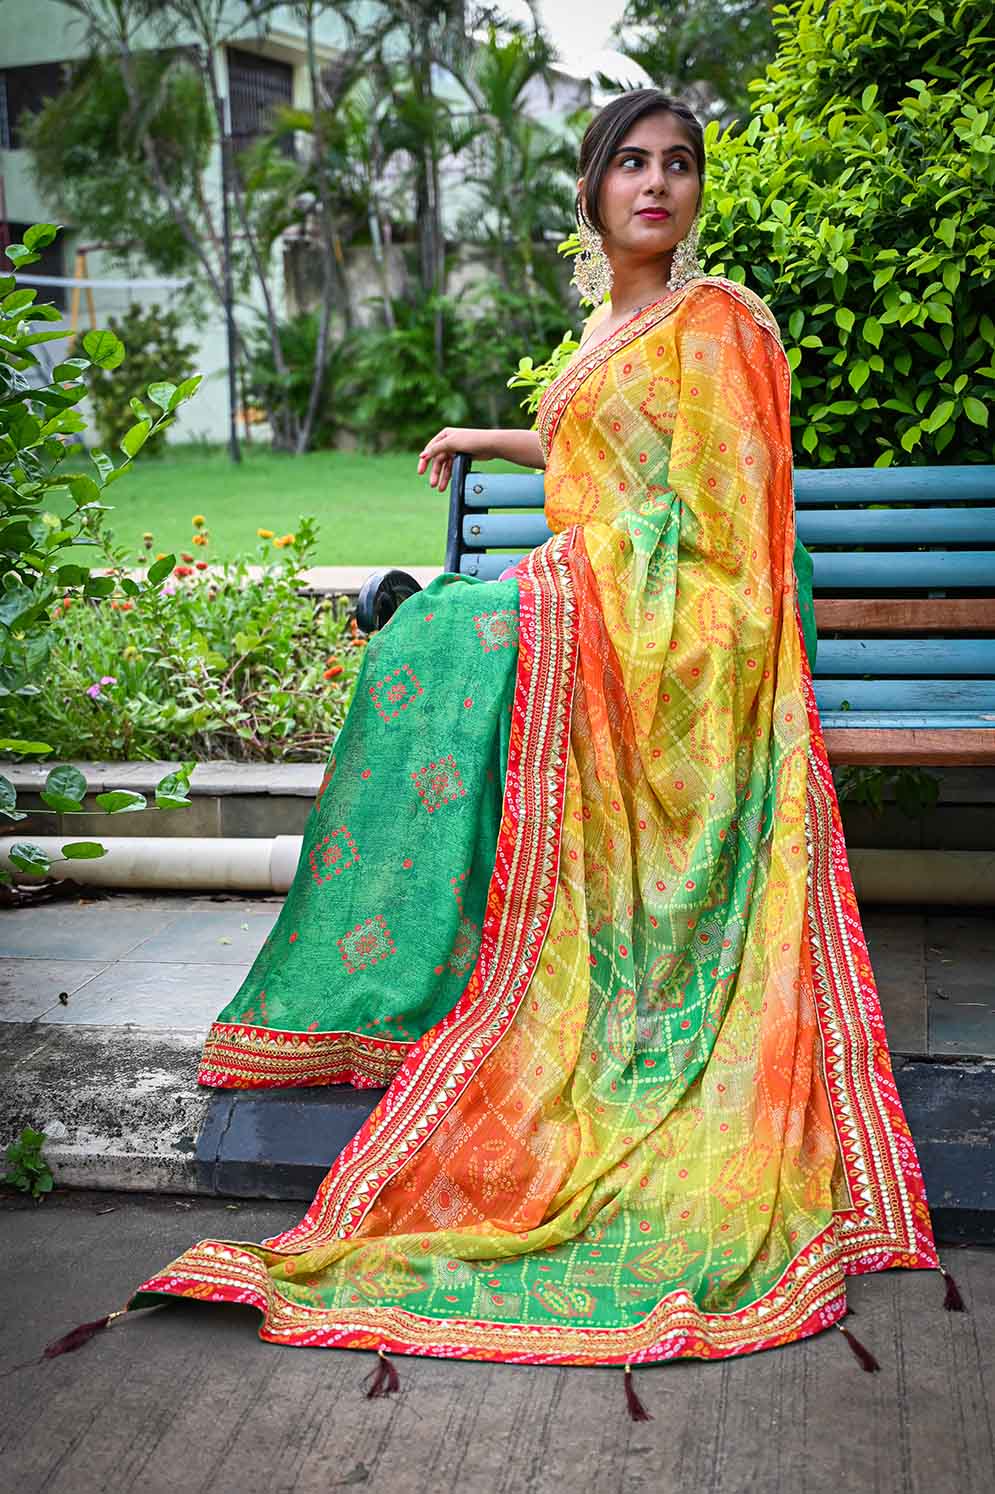 Prepossessing Green Bandhej With Gota Patti Border Wrap In One Minute Saree With Readymade Blouse - Isadora Life